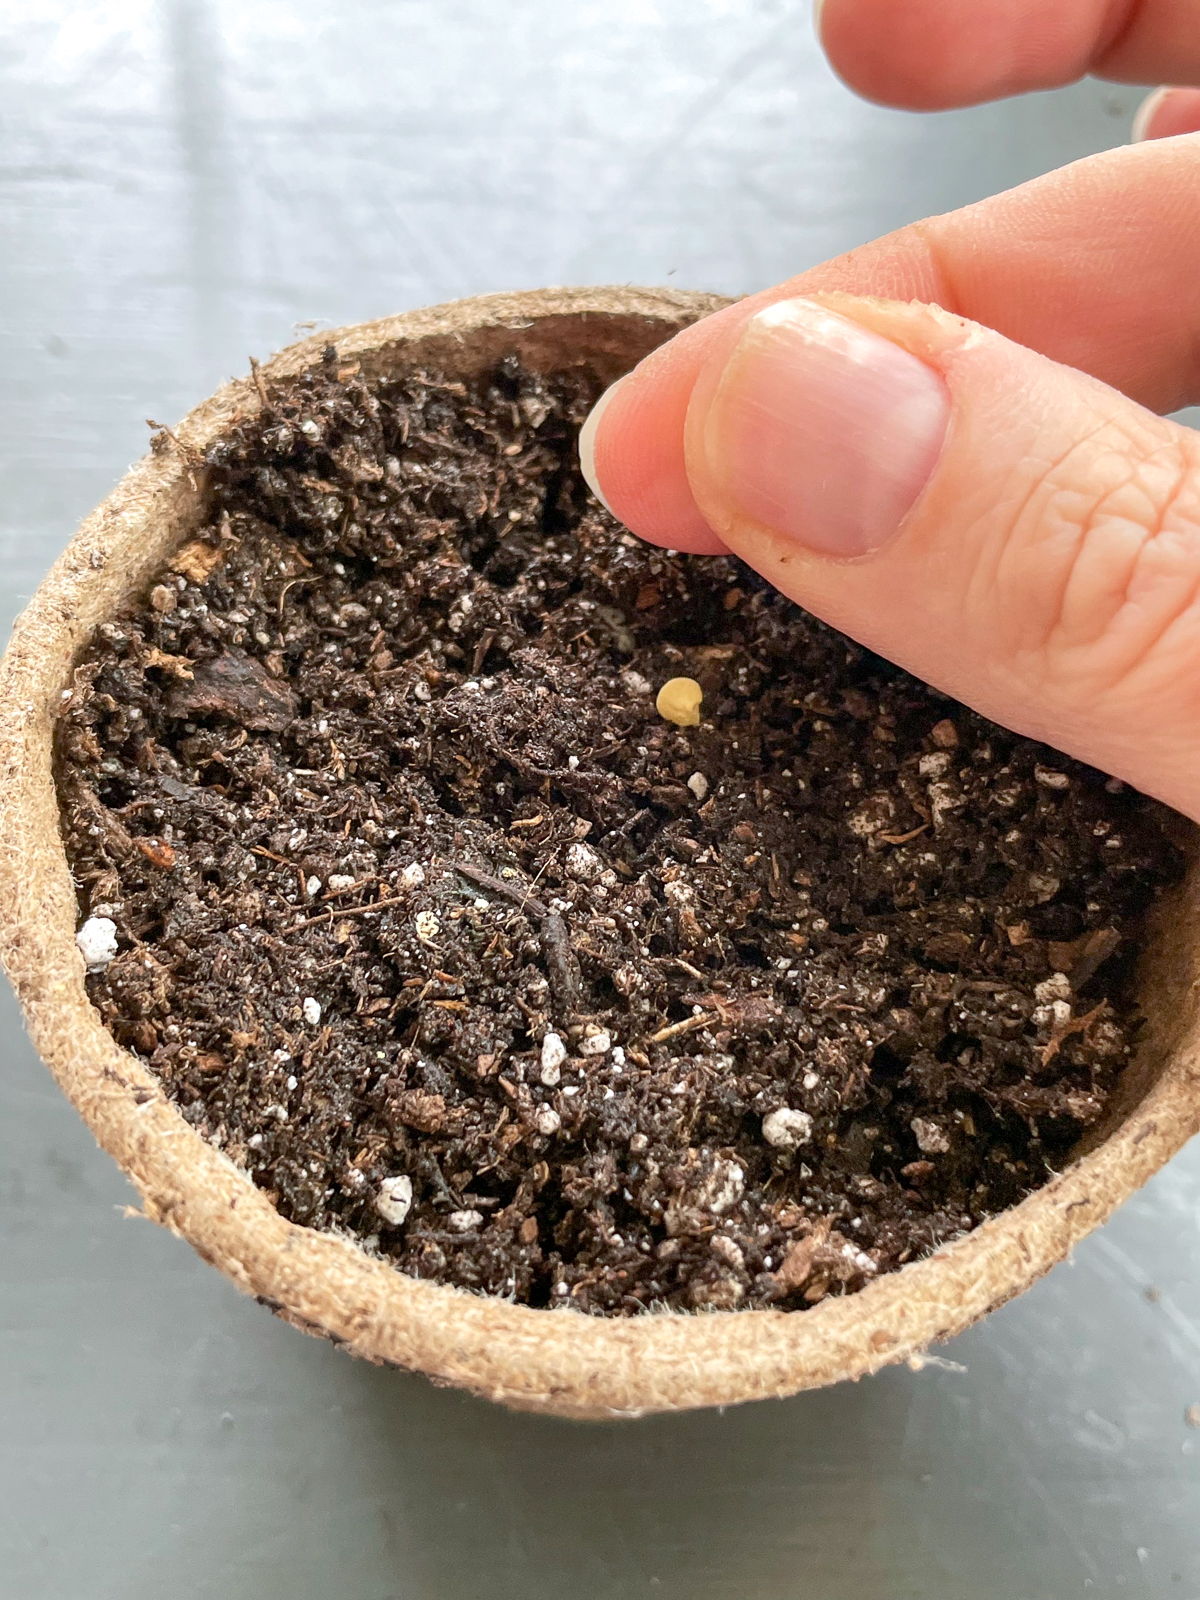 planting pepper seeds in a peat pot